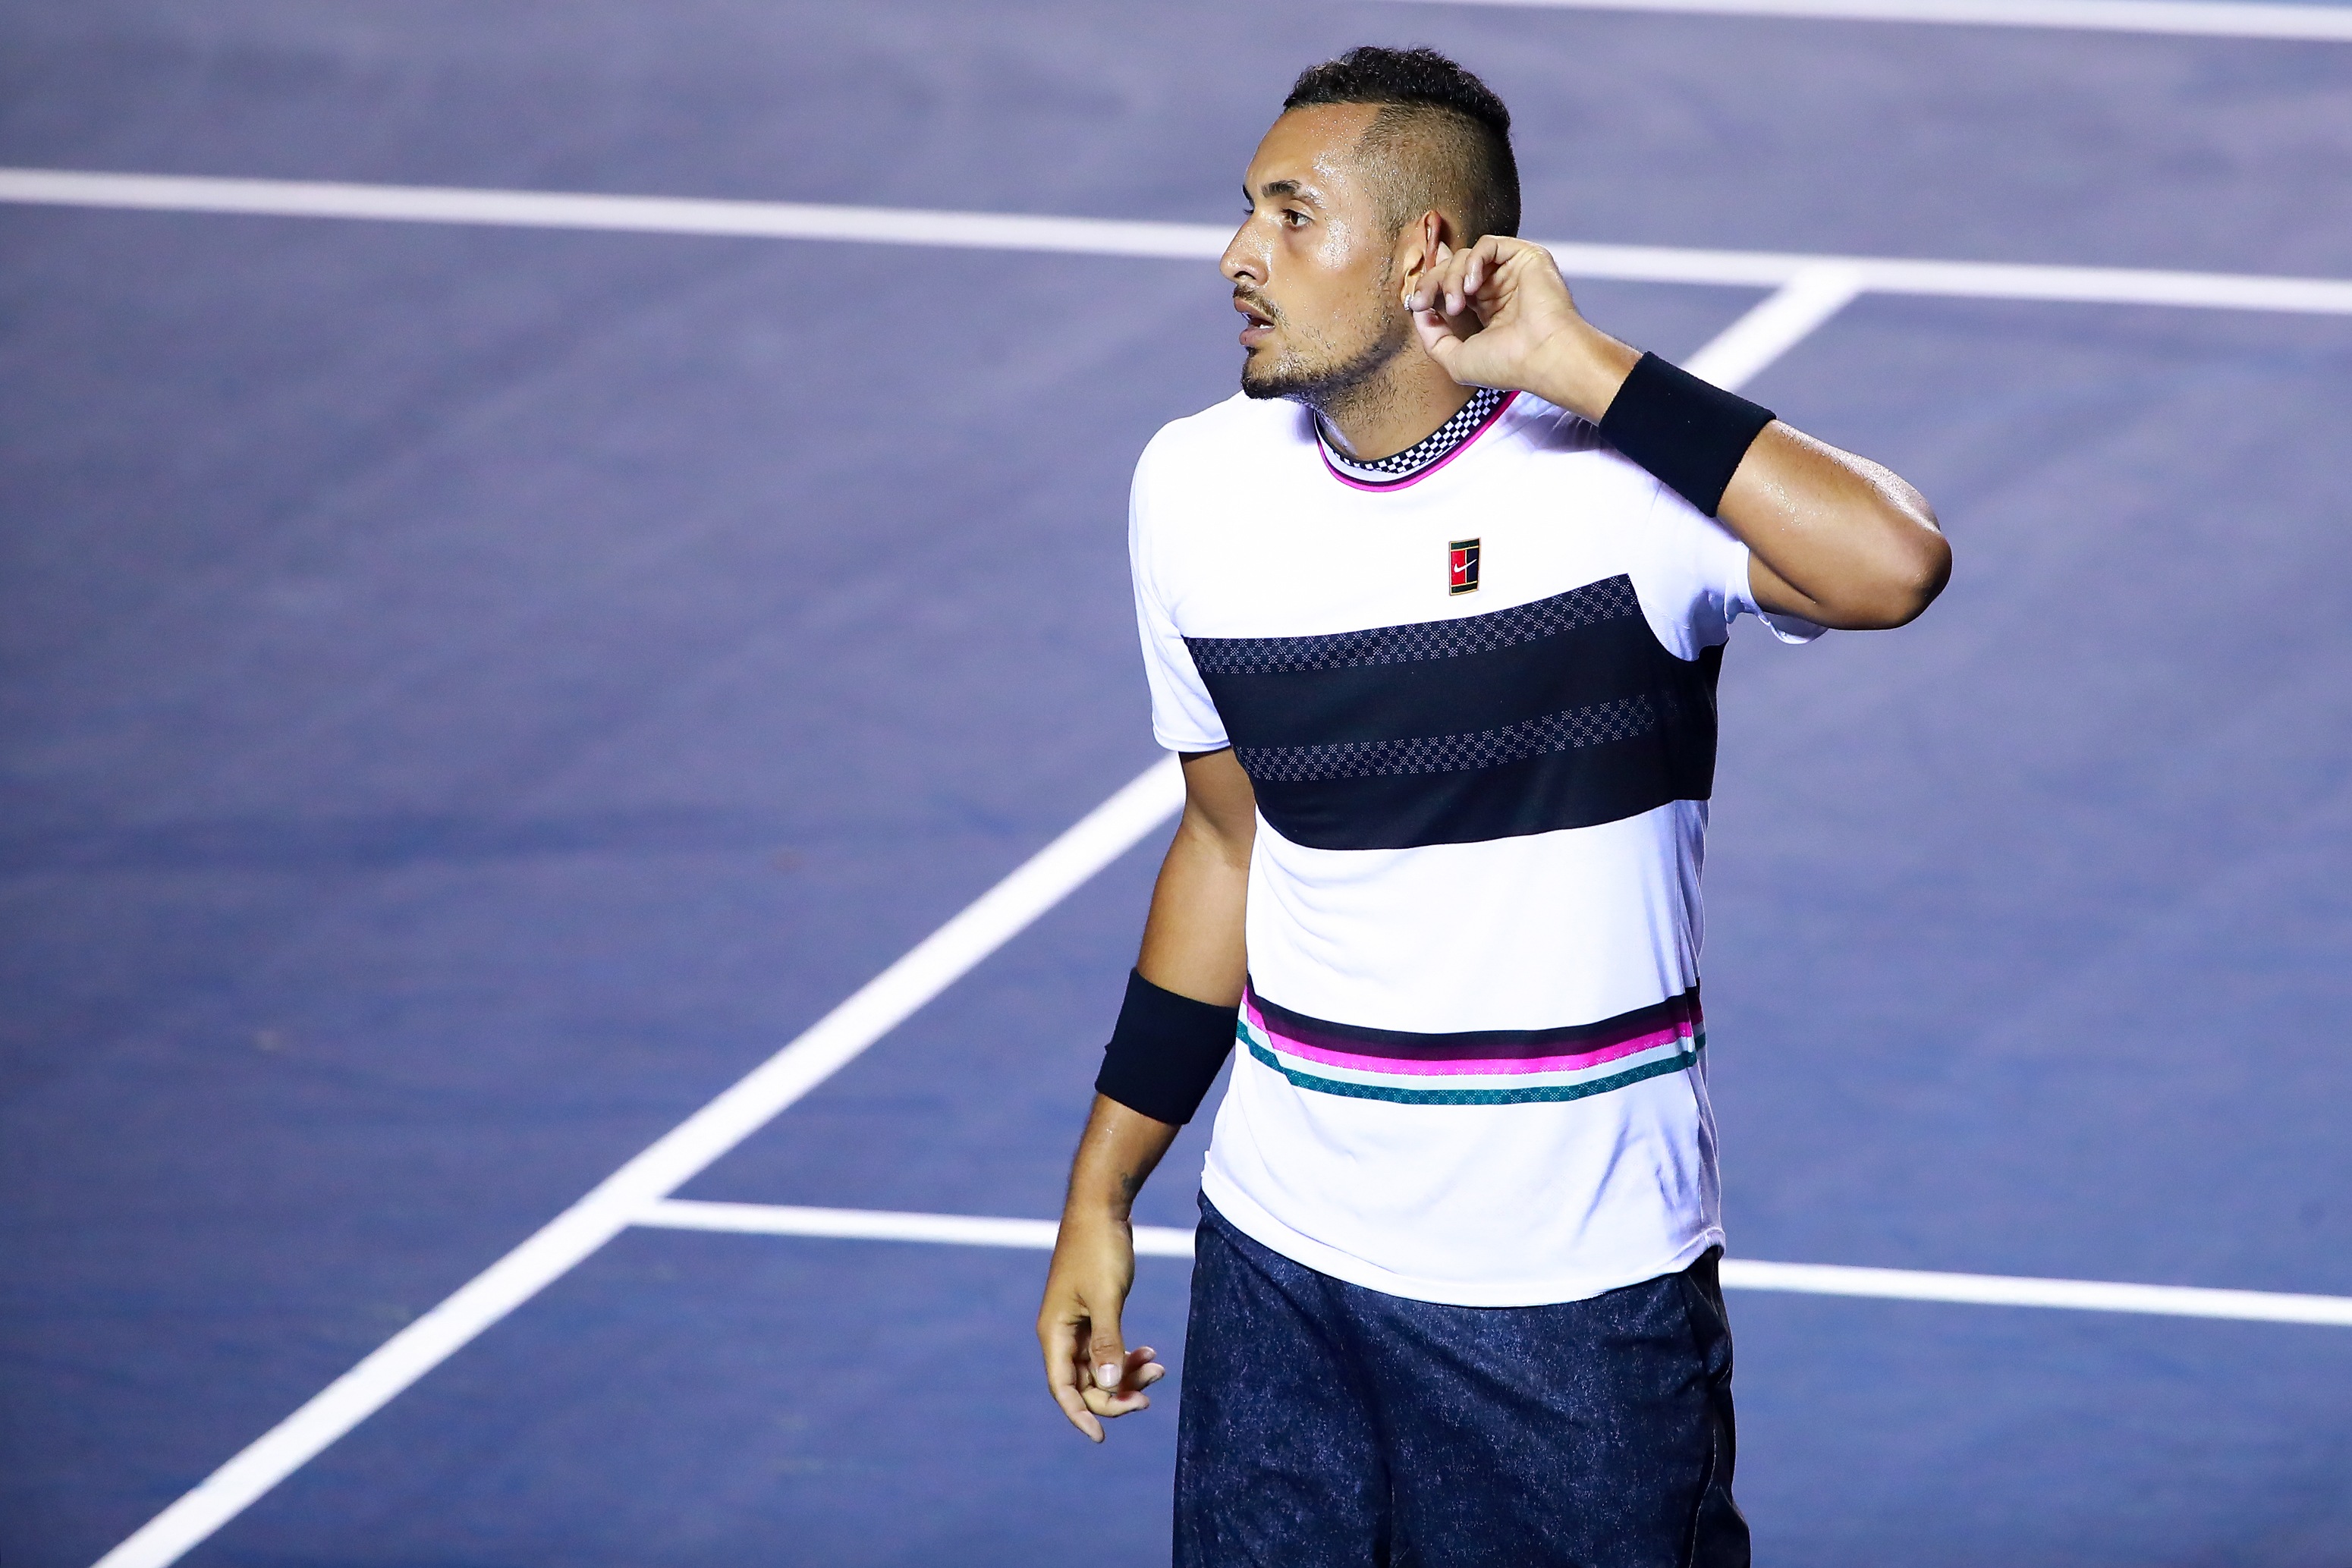 HIGHLIGHTS—Kyrgios saves match points, edges Nadal in Acapulco classic